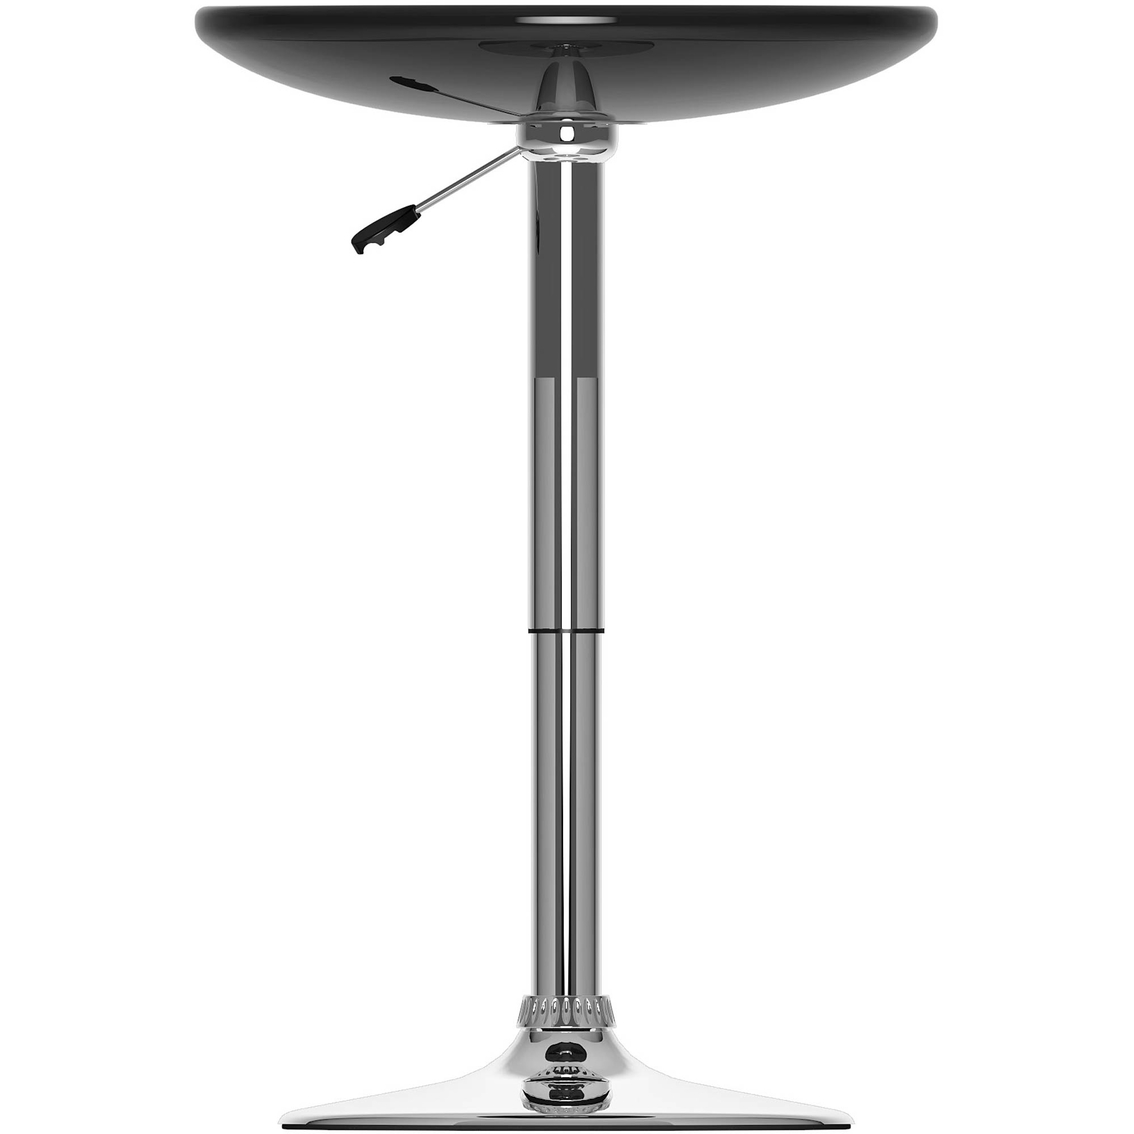 CorLiving DAW-700-T Adjustable Height Round Bar Table in Glossy Black - Image 3 of 4